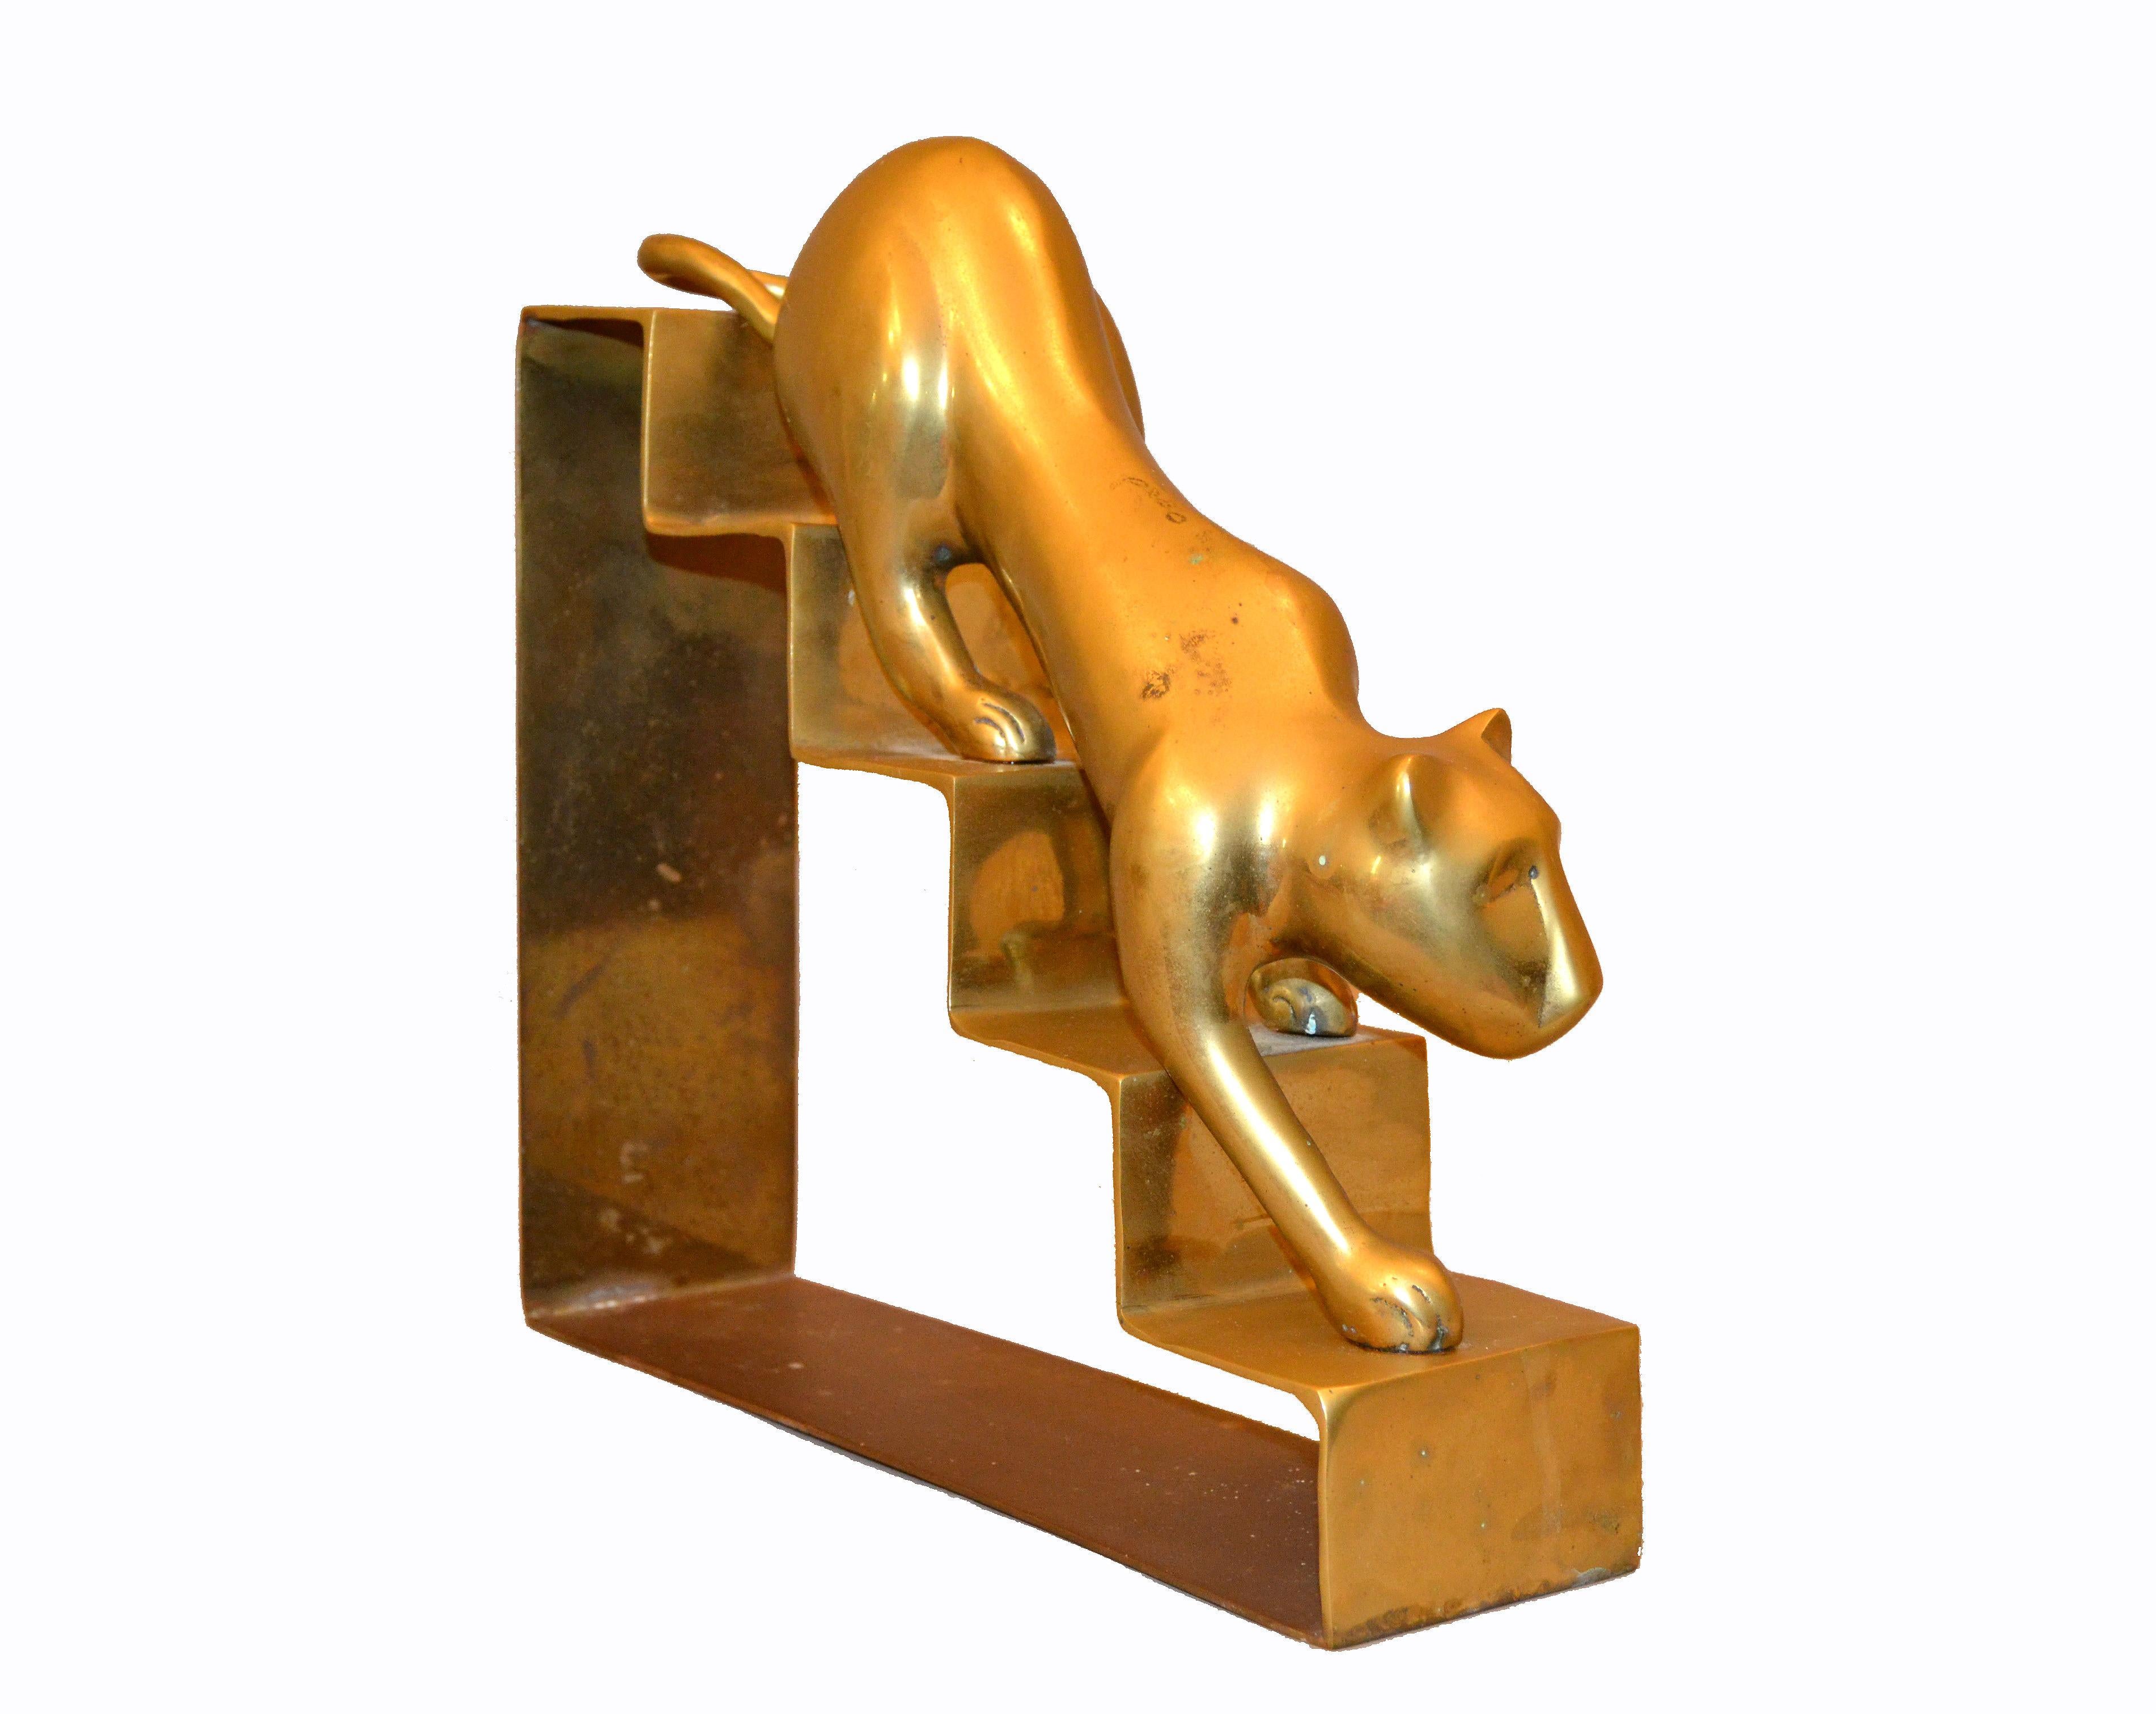 This is a beautiful panther sculpture made out of bronze walking down the stairs.
Wonderfully crafted with great curves and lines.
Due to age the bronze shows well aged patina.